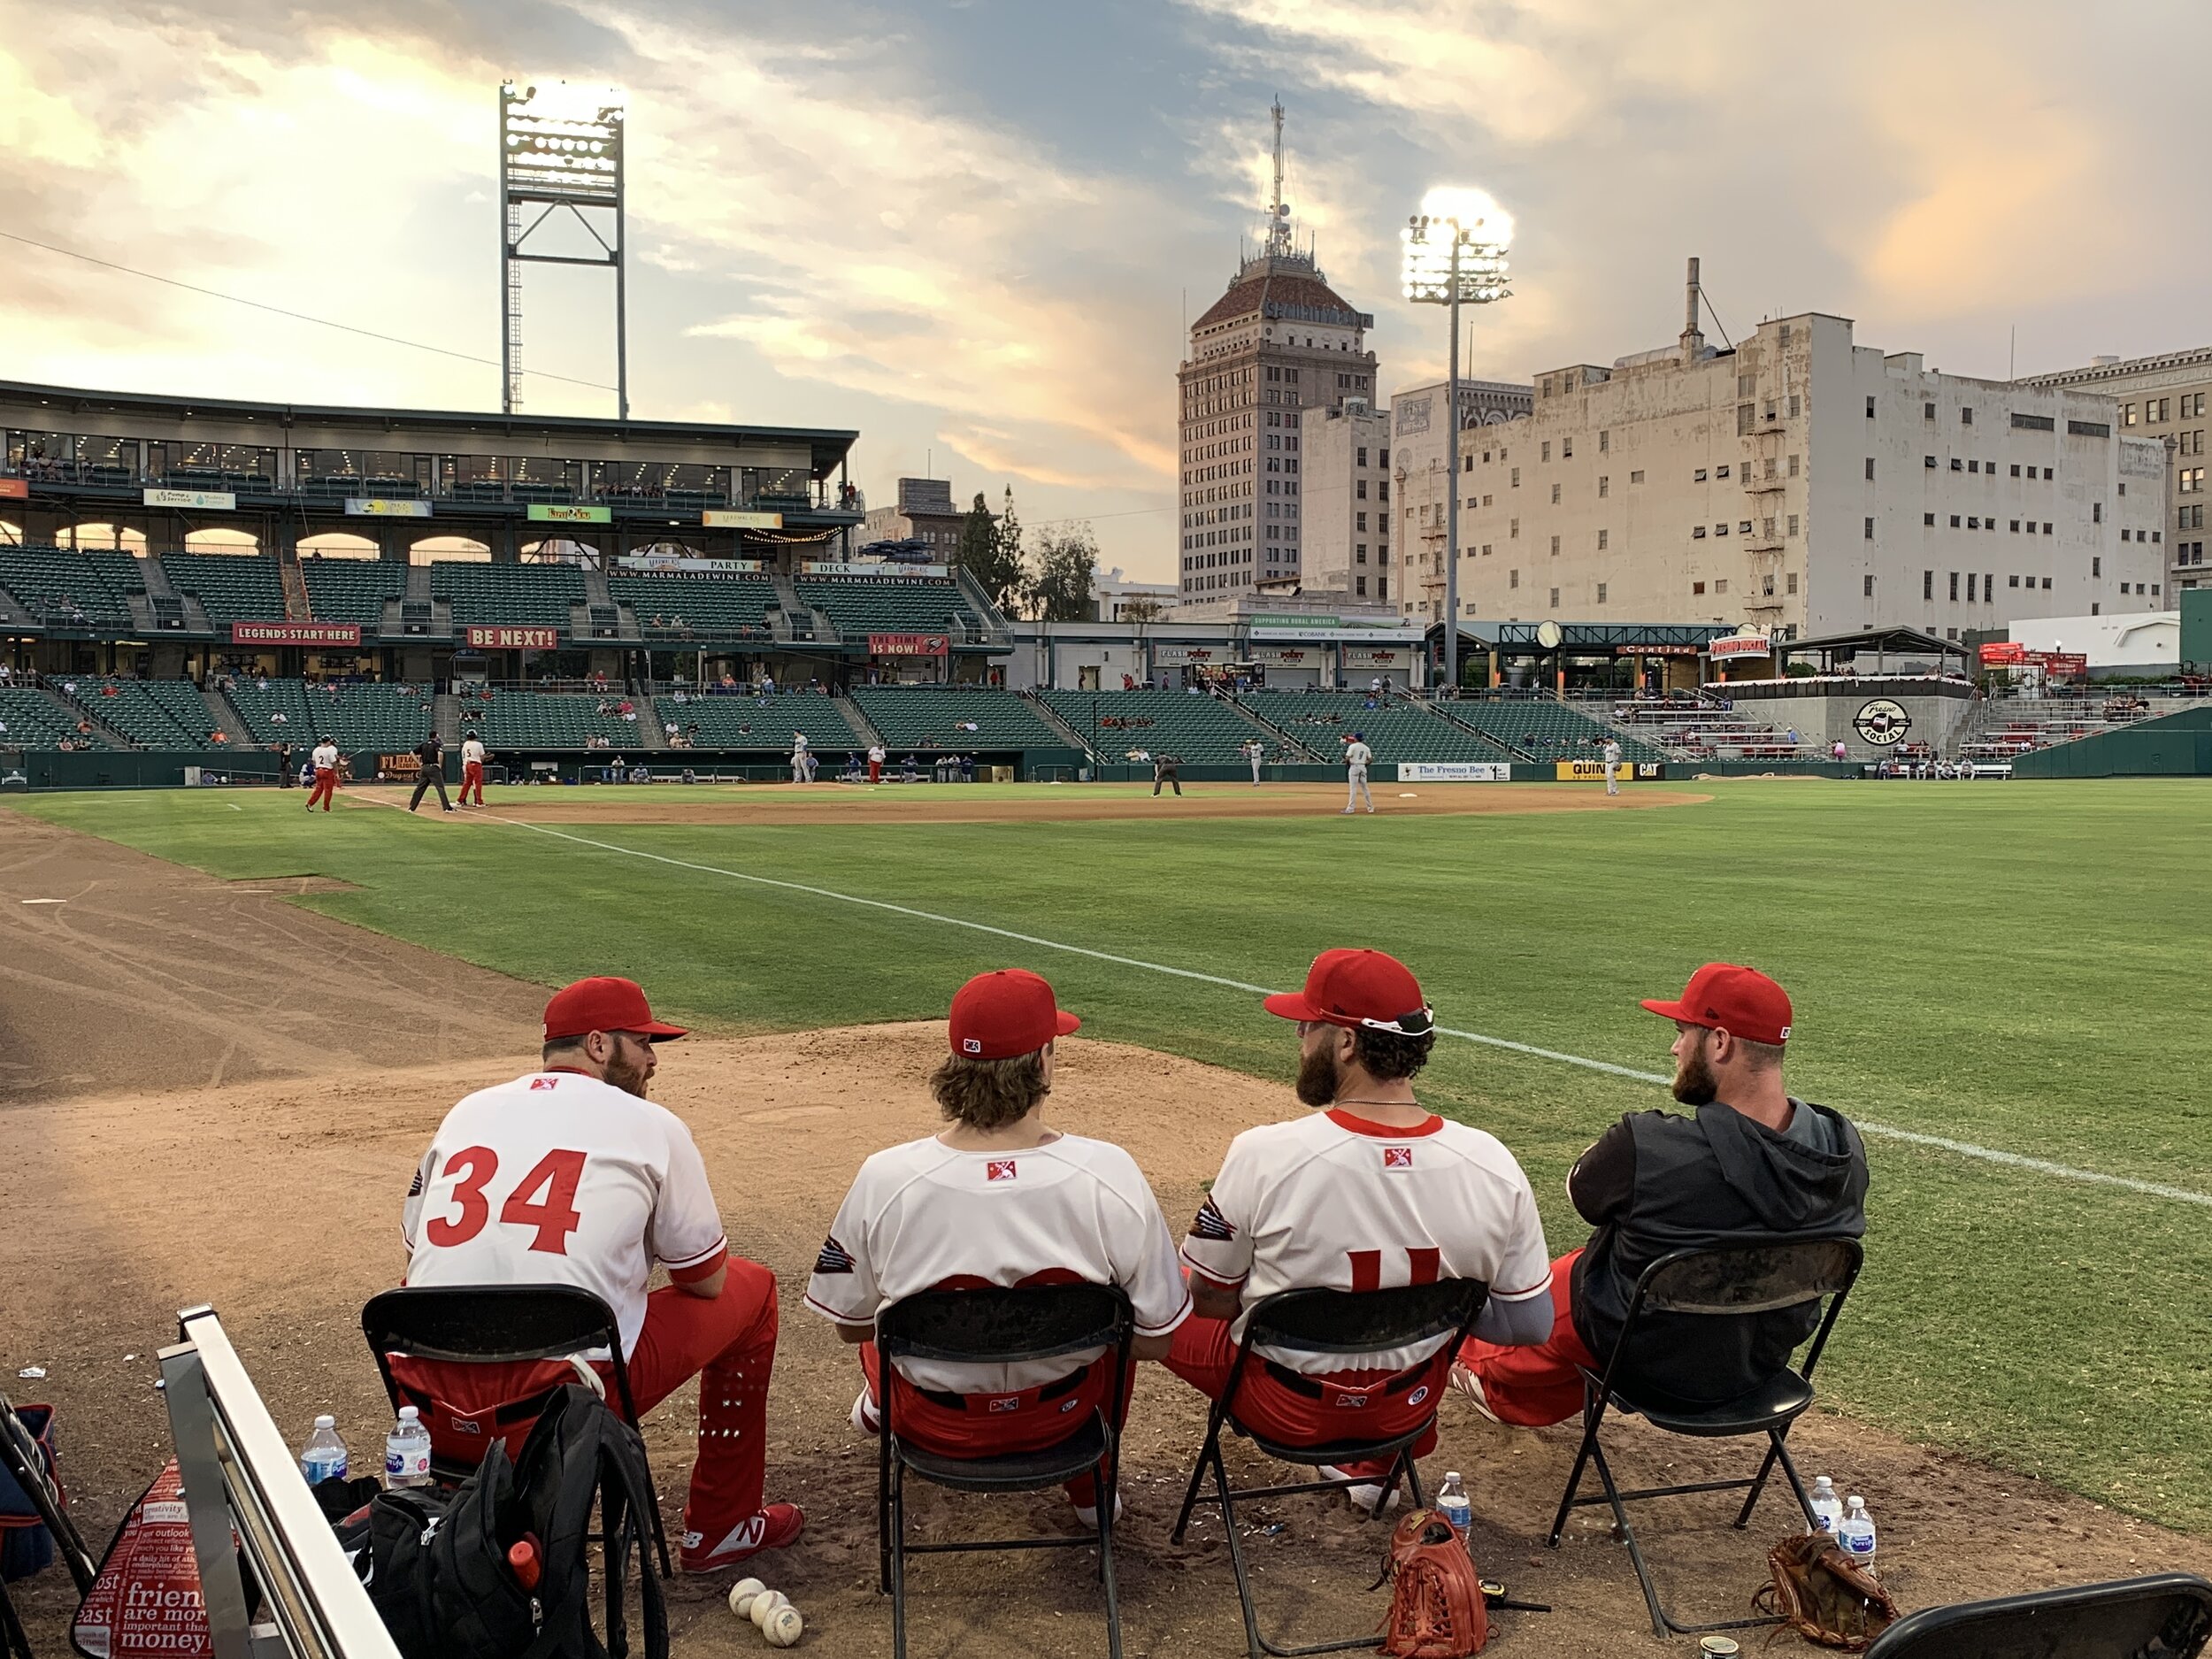 California Baseball Day 7: Fresno Grizzlies — Mapping the path